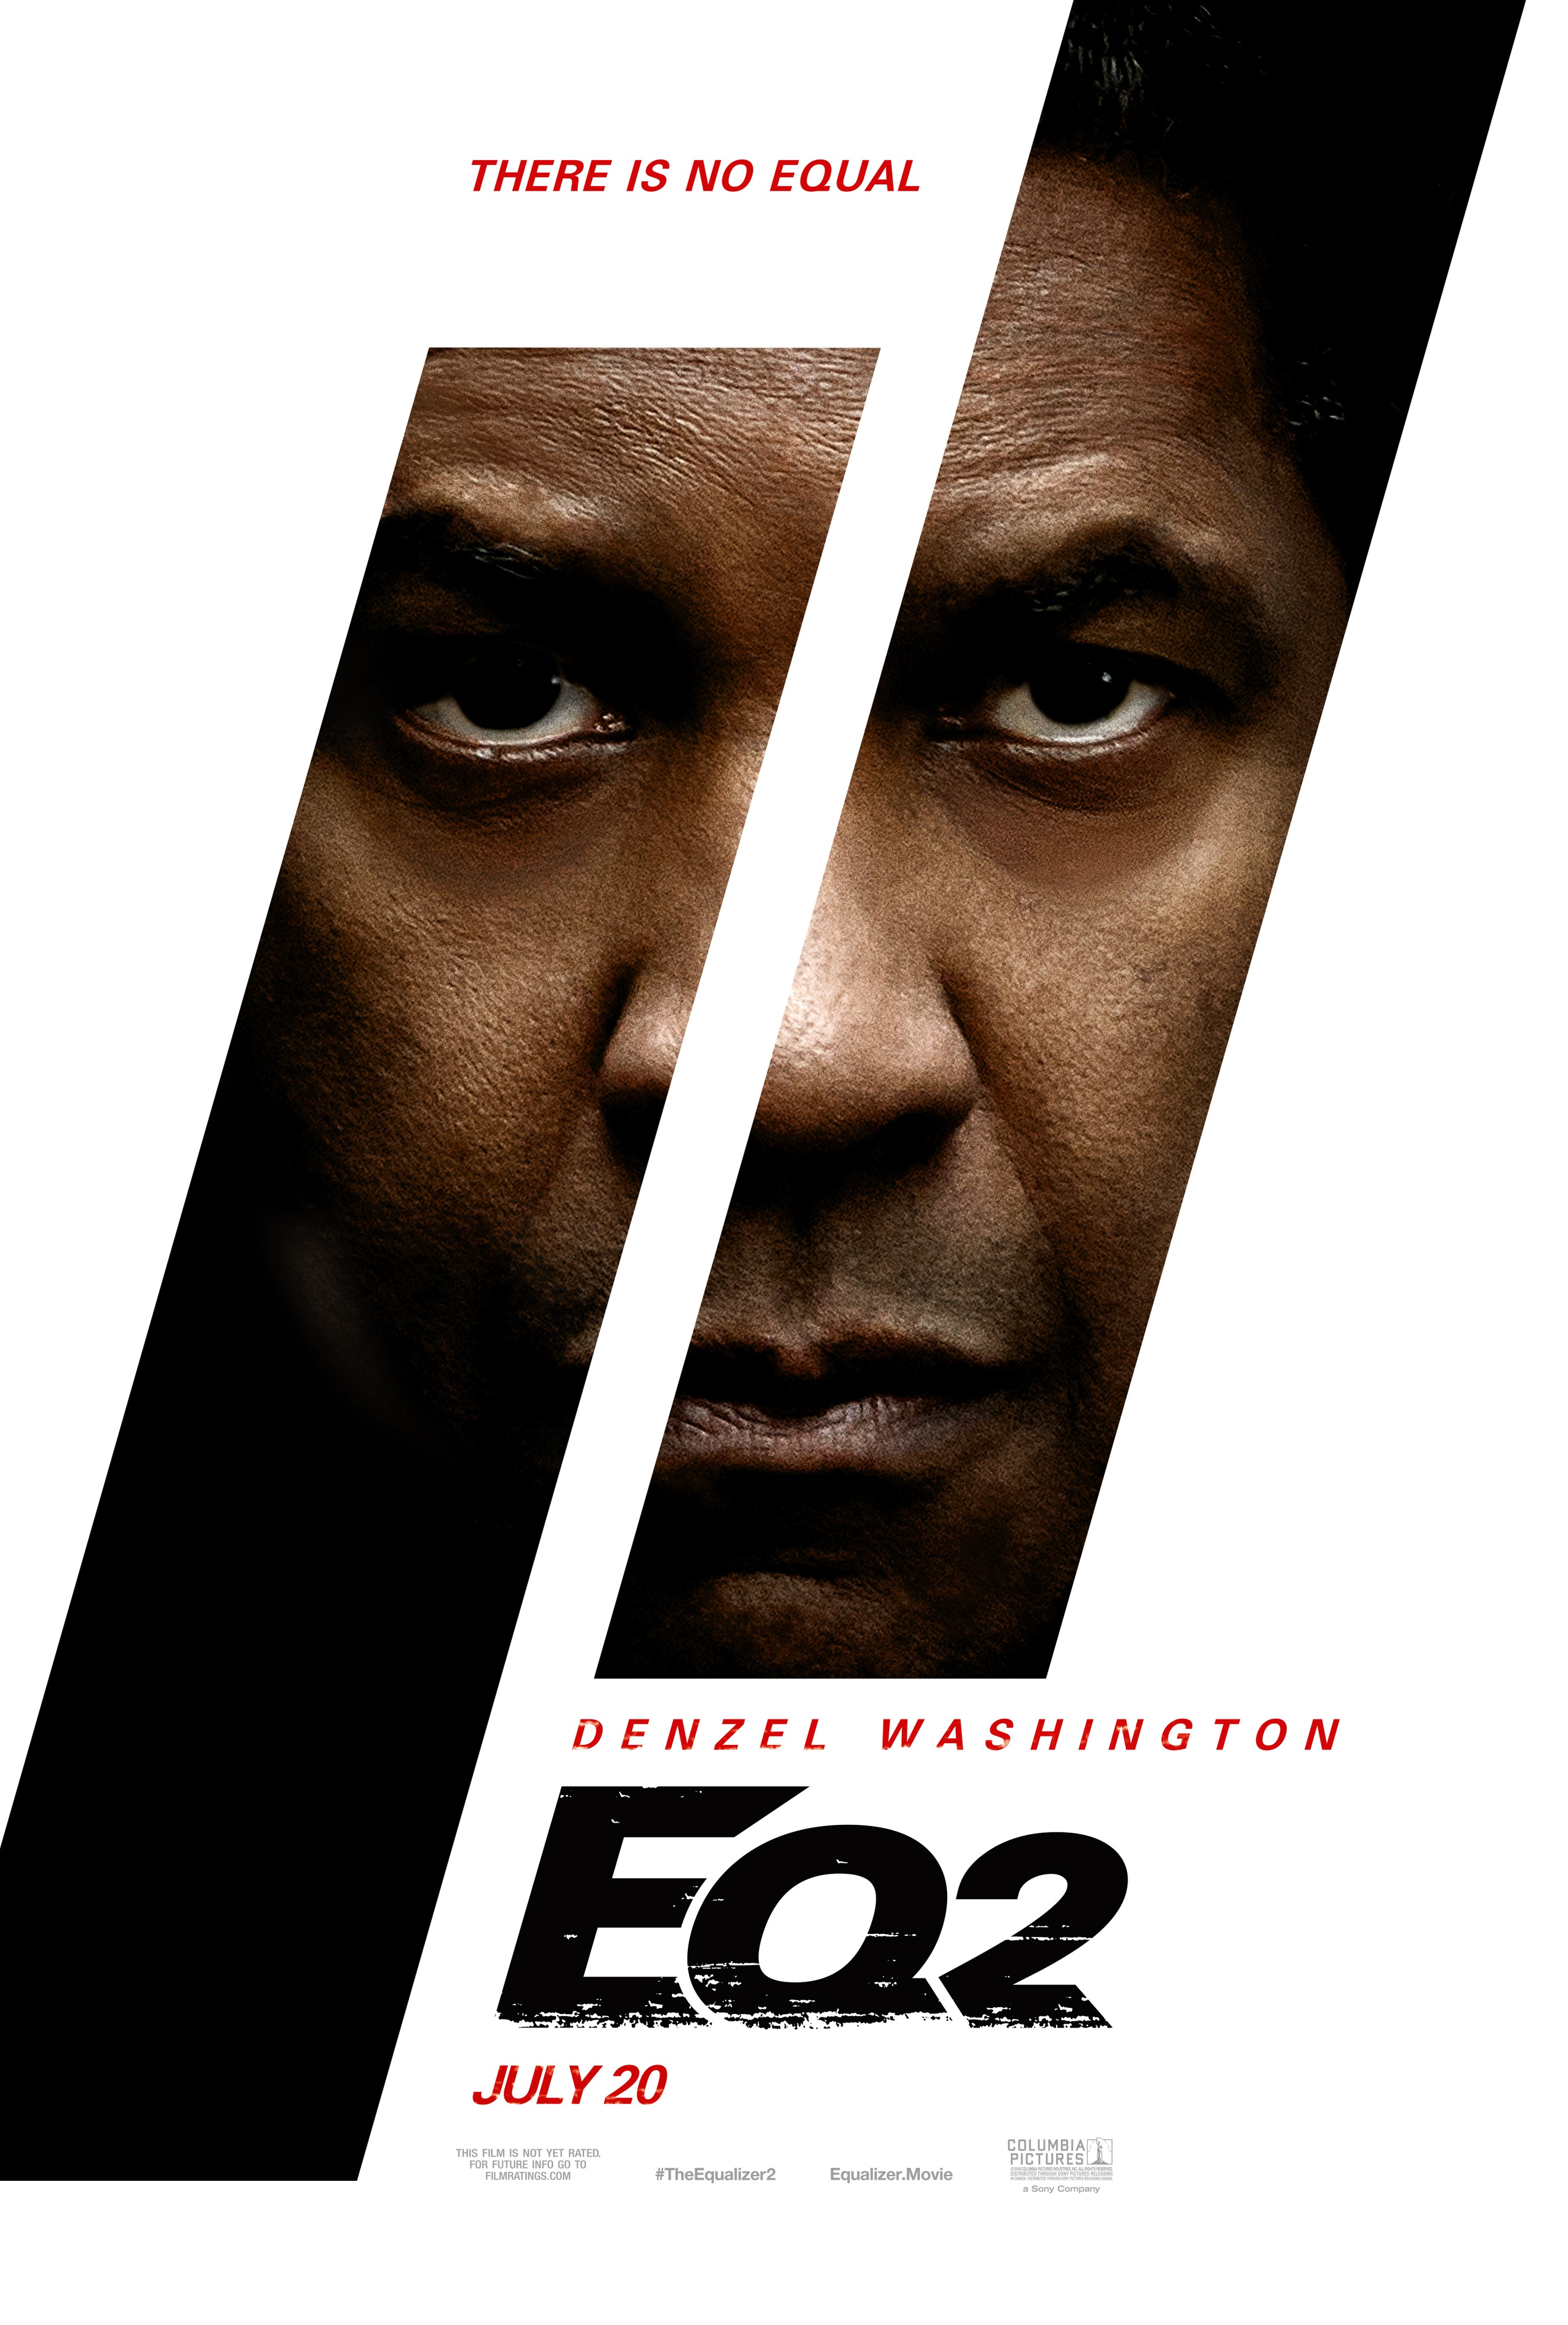 The Equalizer 3: 'The Equalizer 3': See how to watch movie online